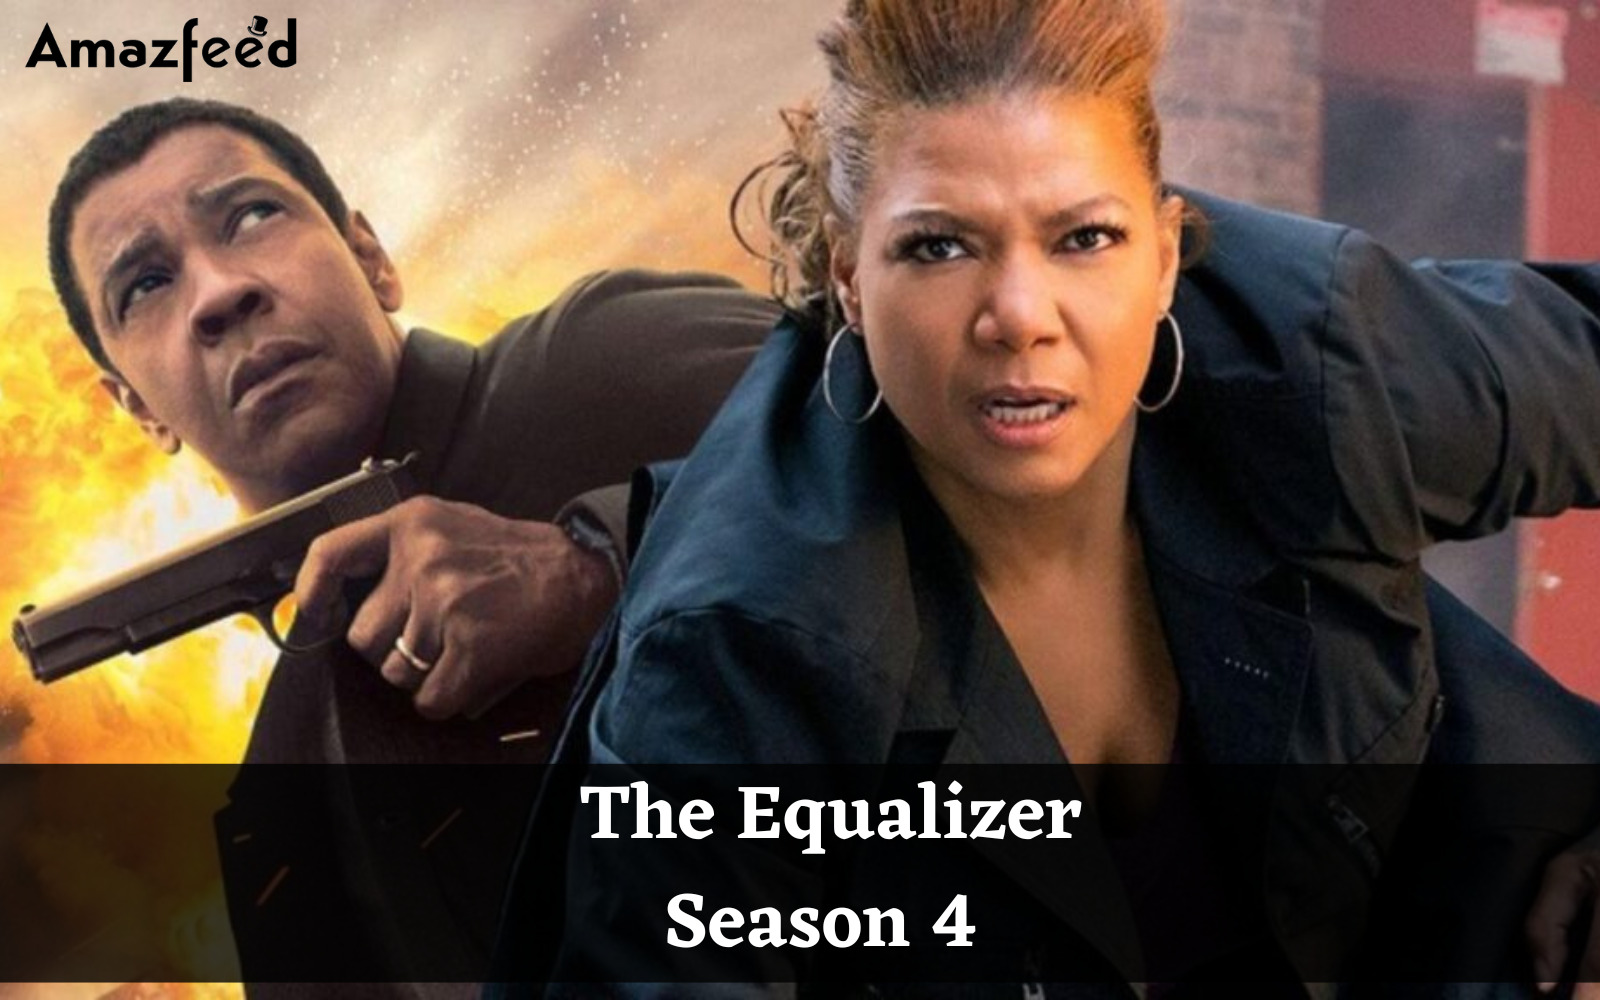 Is The Equalizer Season 4 Renewed Or Cancelled